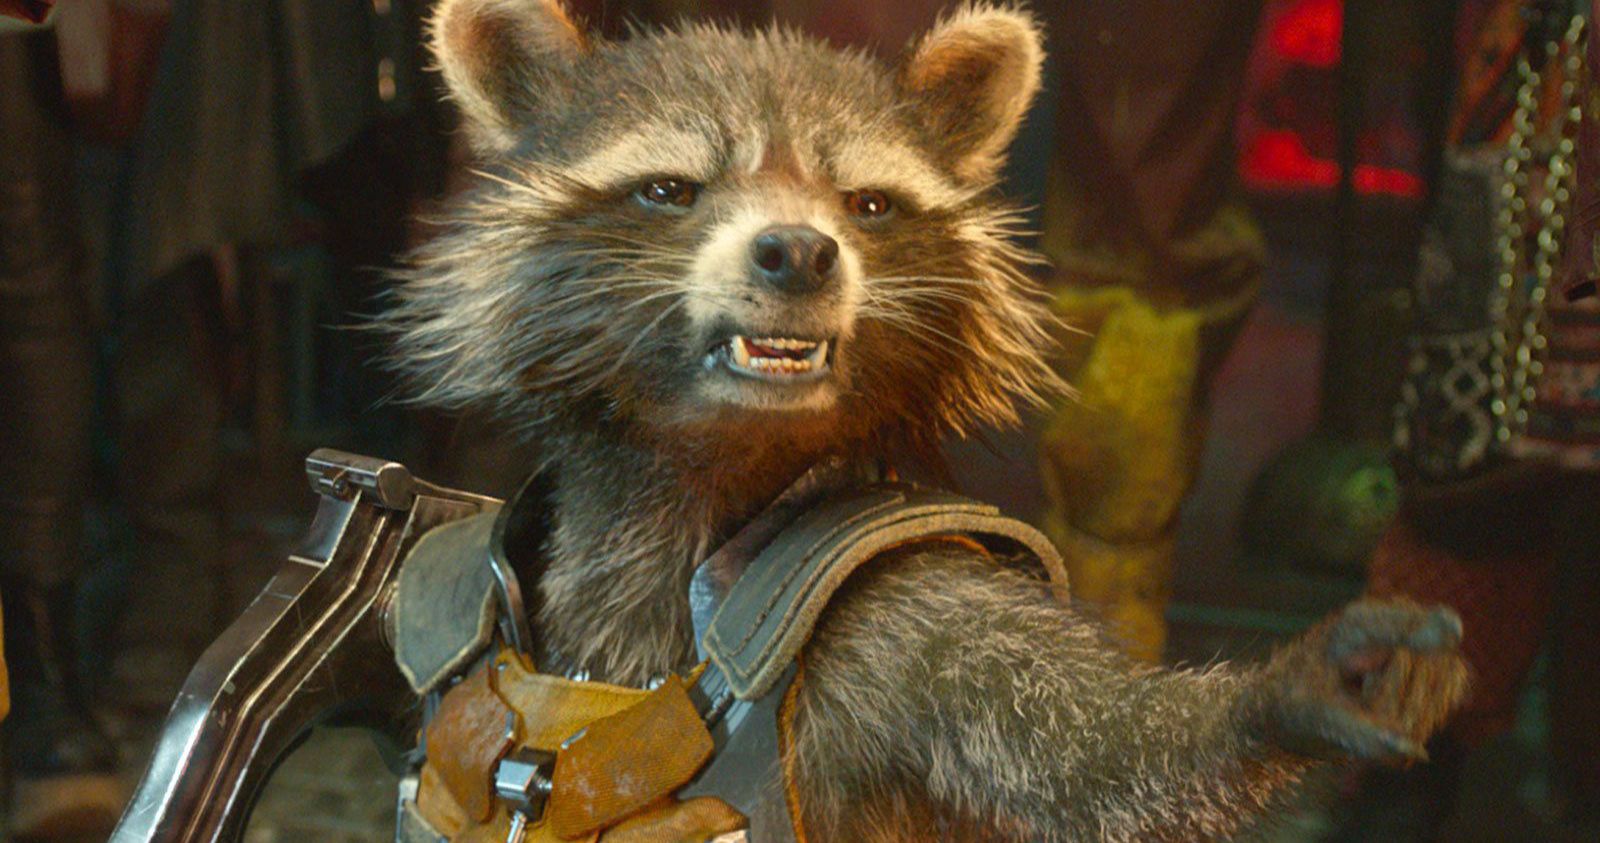 How Rocket Raccoon Discovered the Possibility of God According to James Gunn